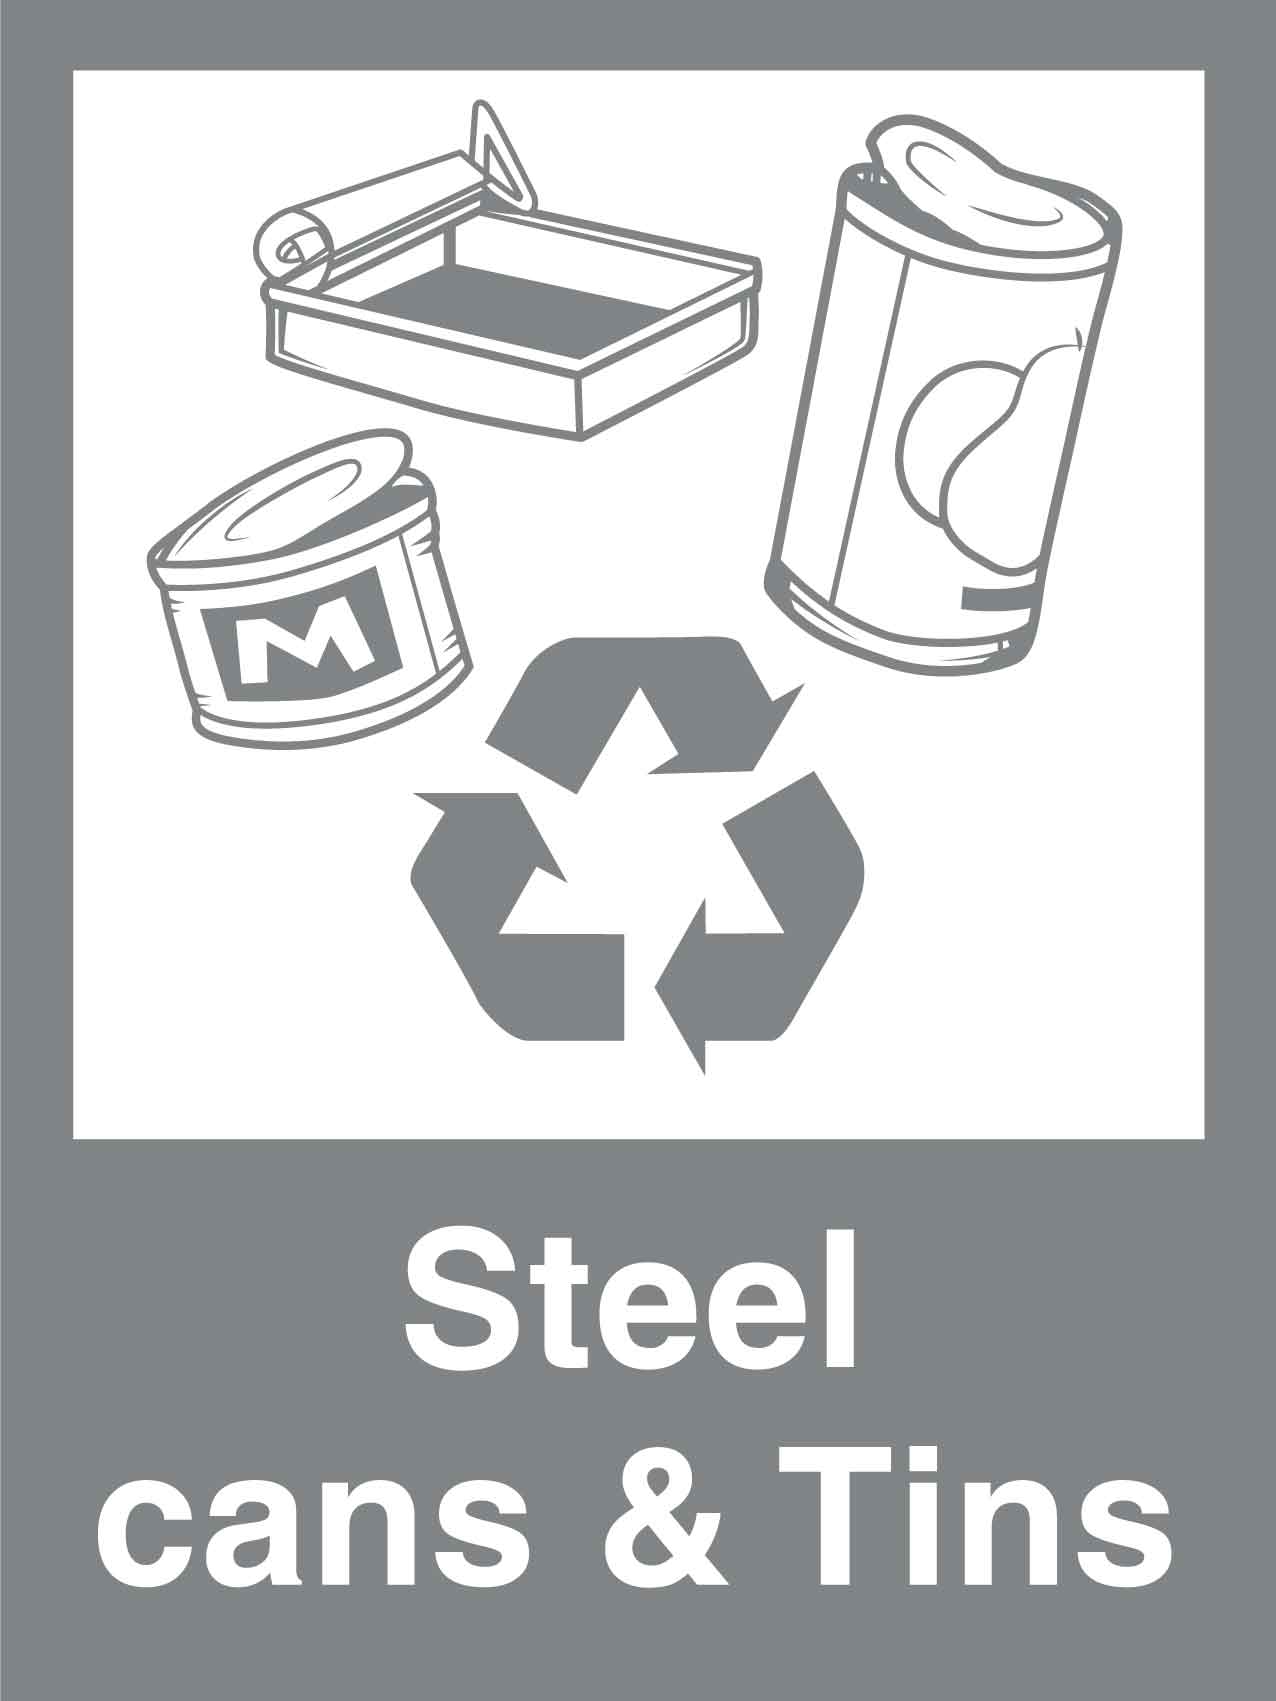 Recycle Steel Cans & Tins Sign